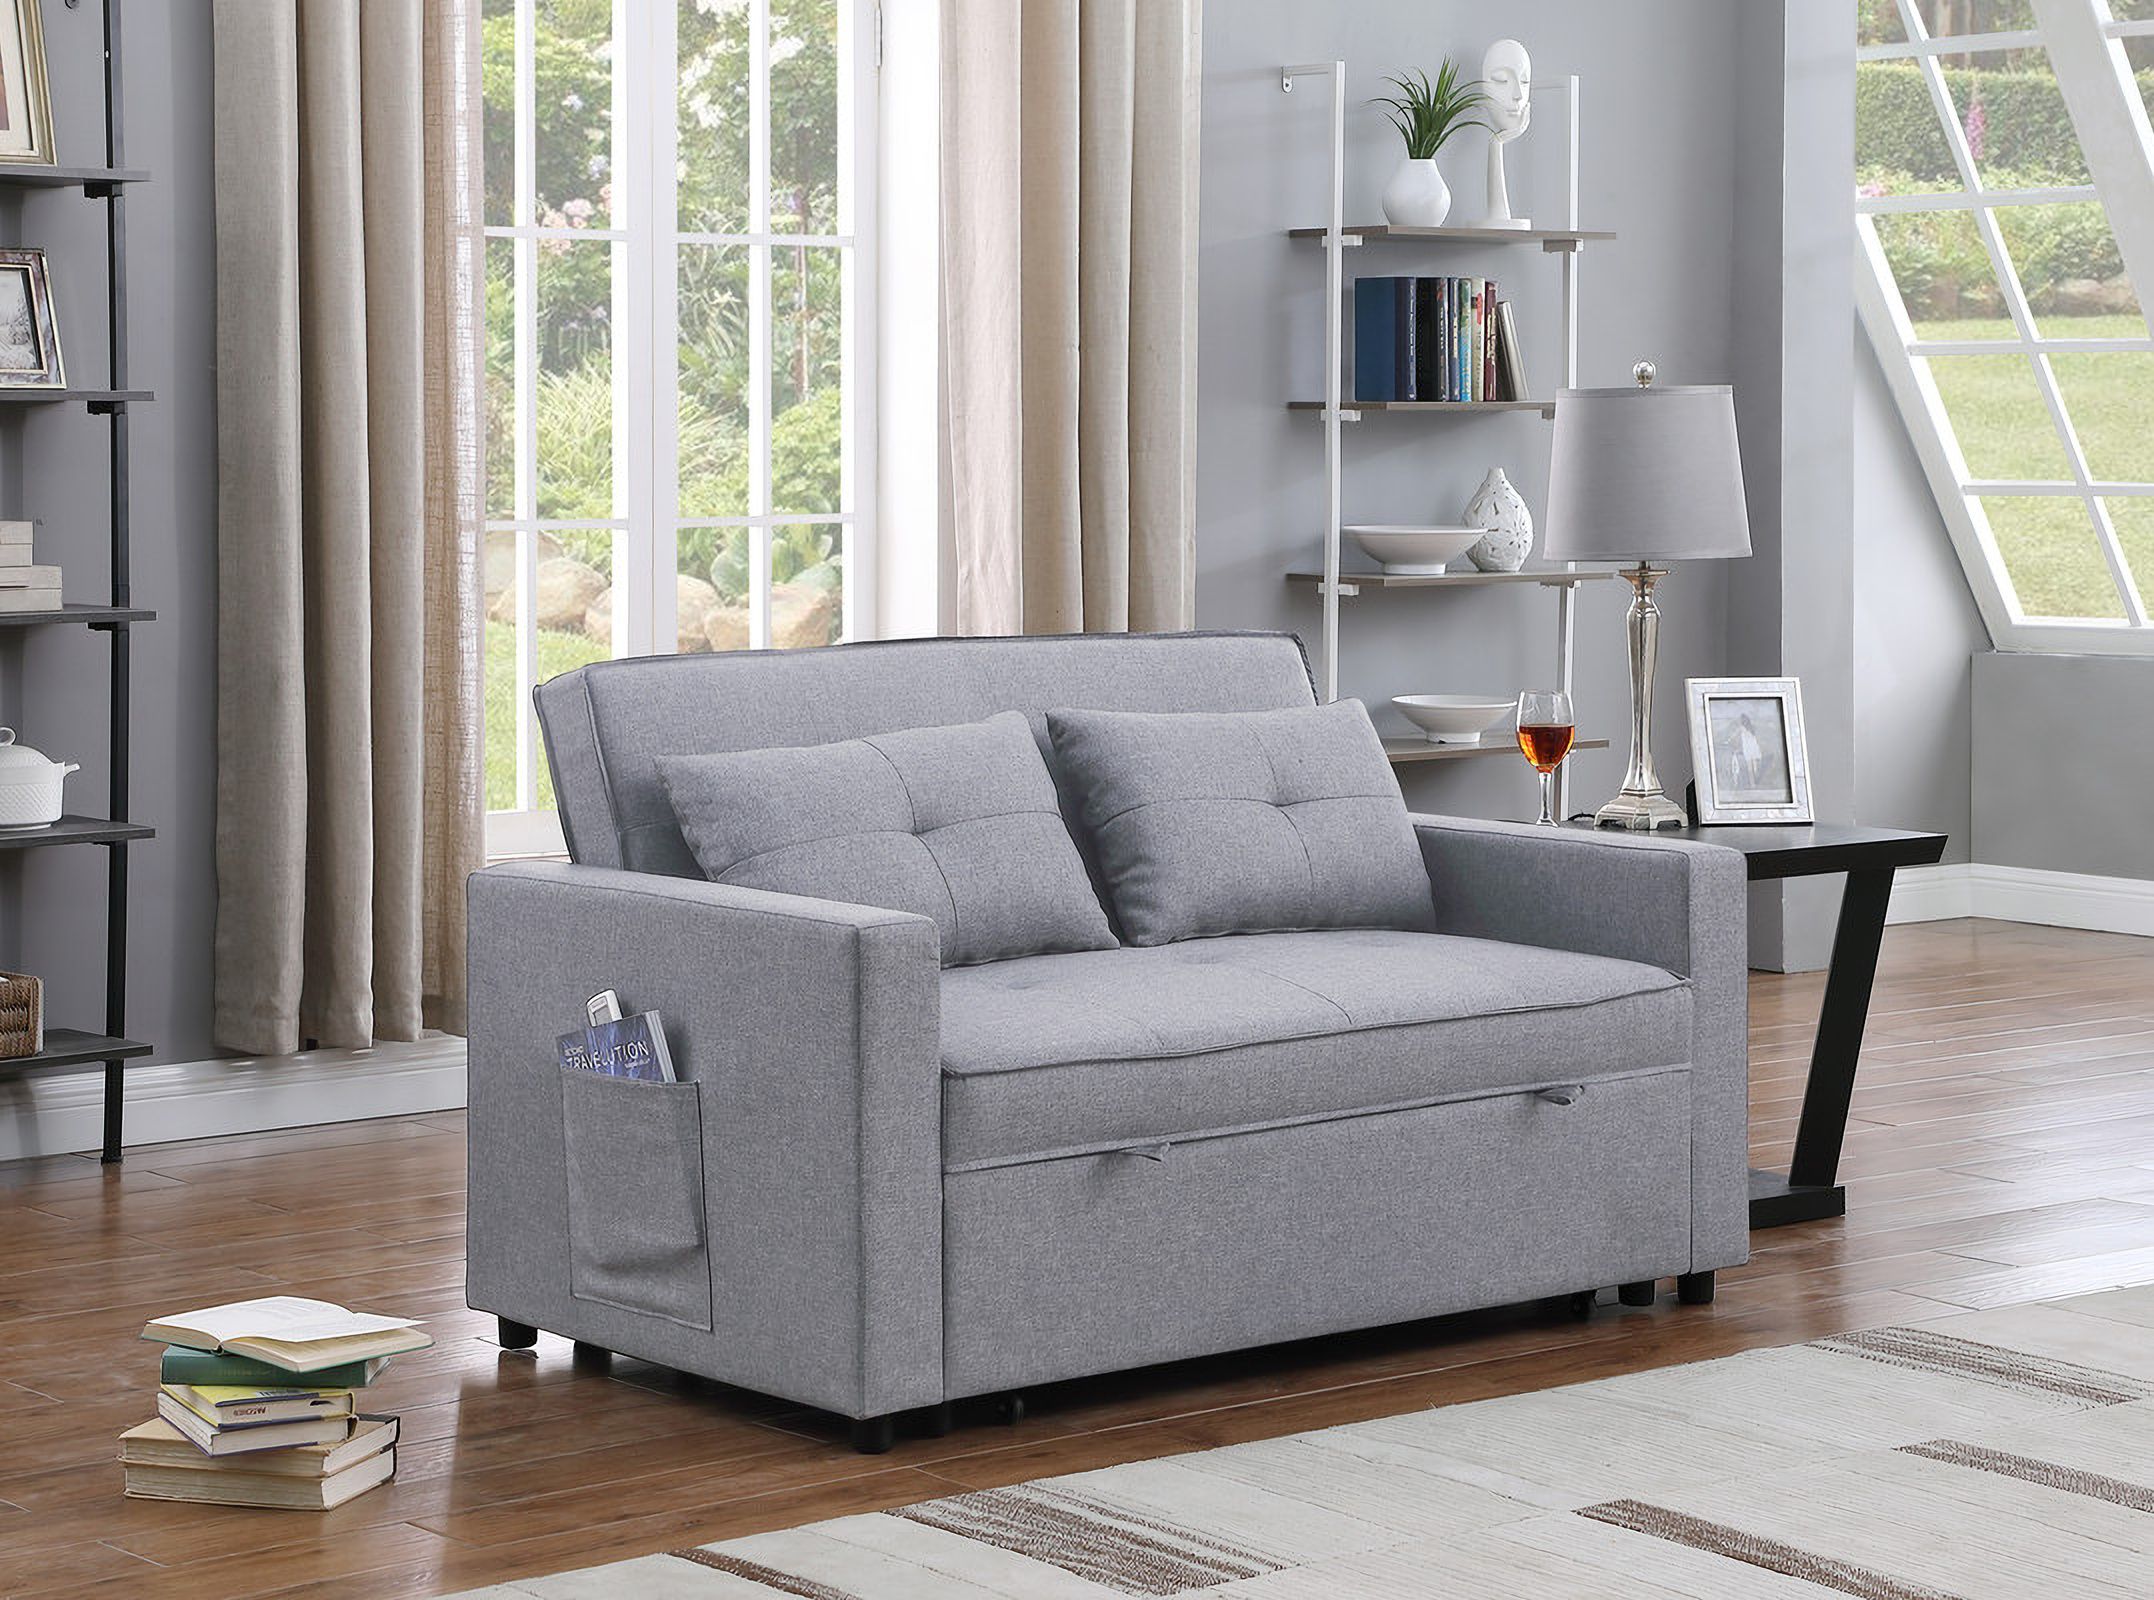 Zoey Light Gray Linen Convertible Sleeper Loveseat With Side Pocket Lilola Home | 1stopbedrooms Intended For Convertible Light Gray Chair Beds (View 5 of 15)